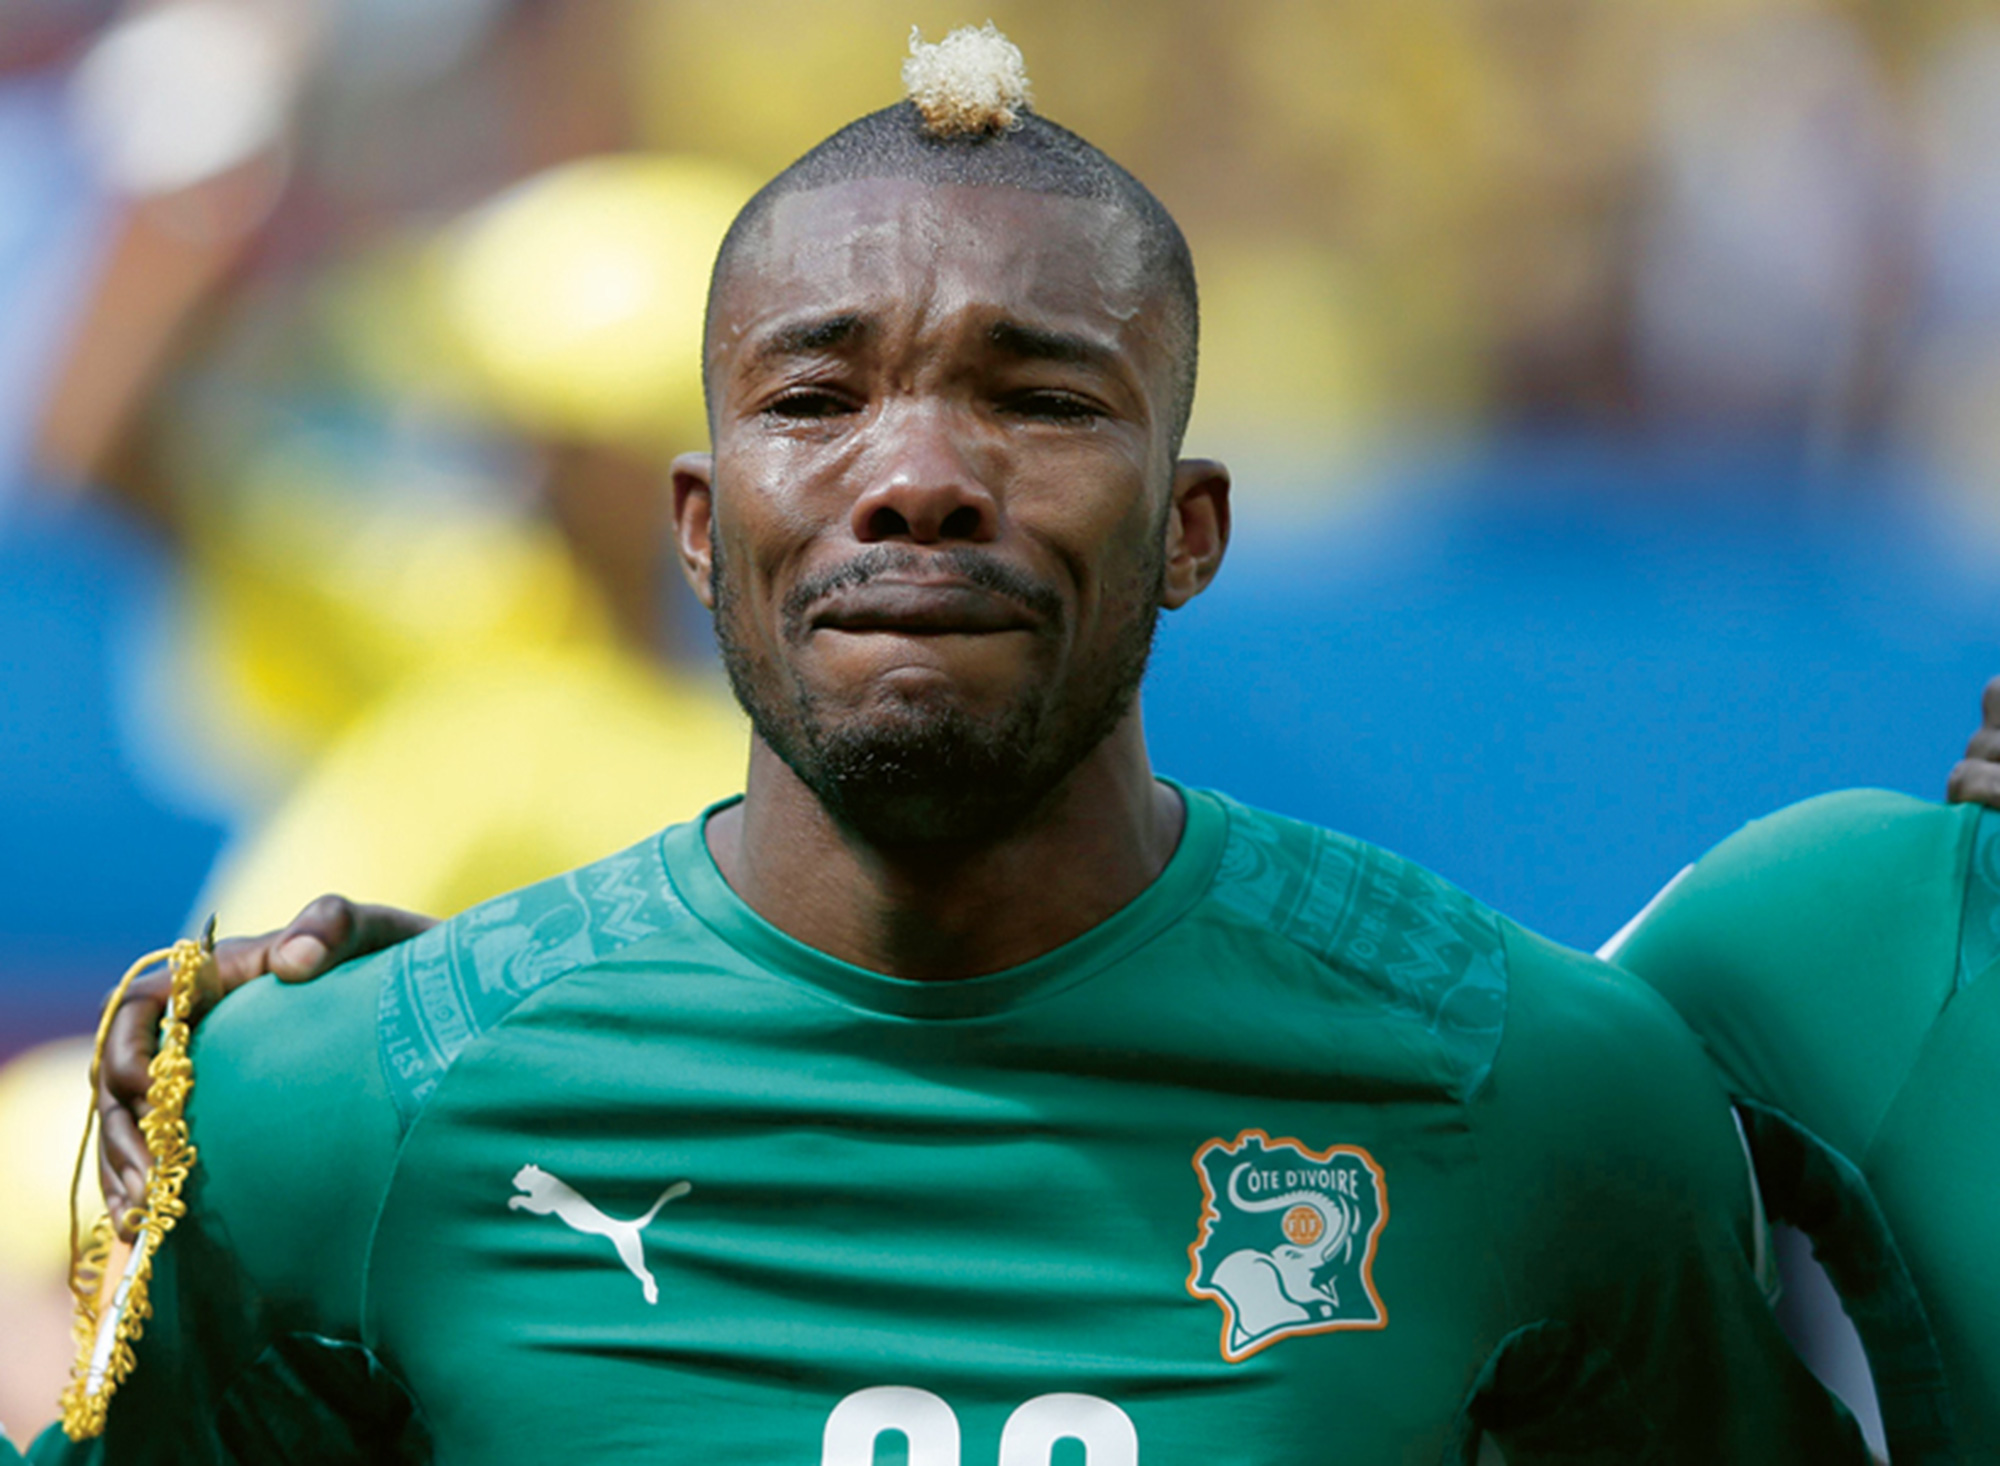 A photograph of soccer player Geoffroy Serey Die in tears.